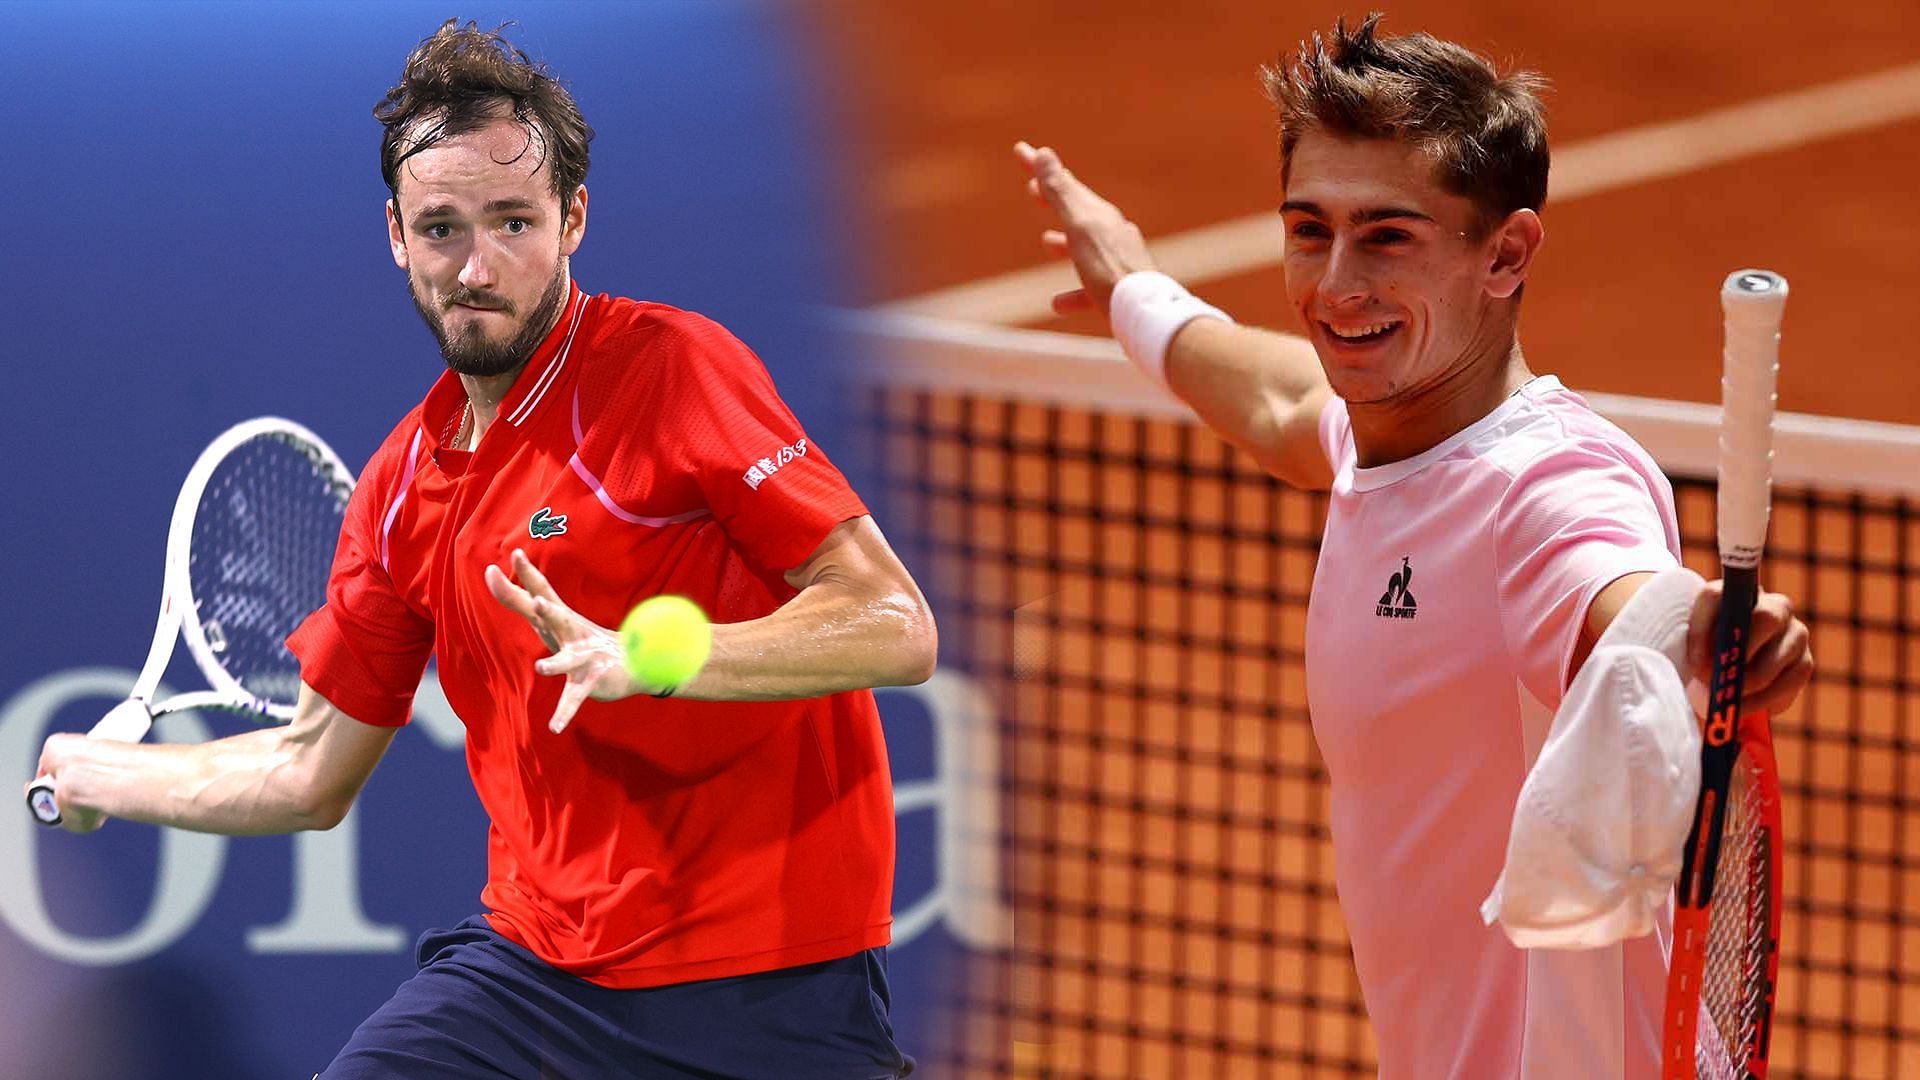 Daniil Medvedev vs Matteo Arnaldi is one of the second-round matches at the Canadian Open